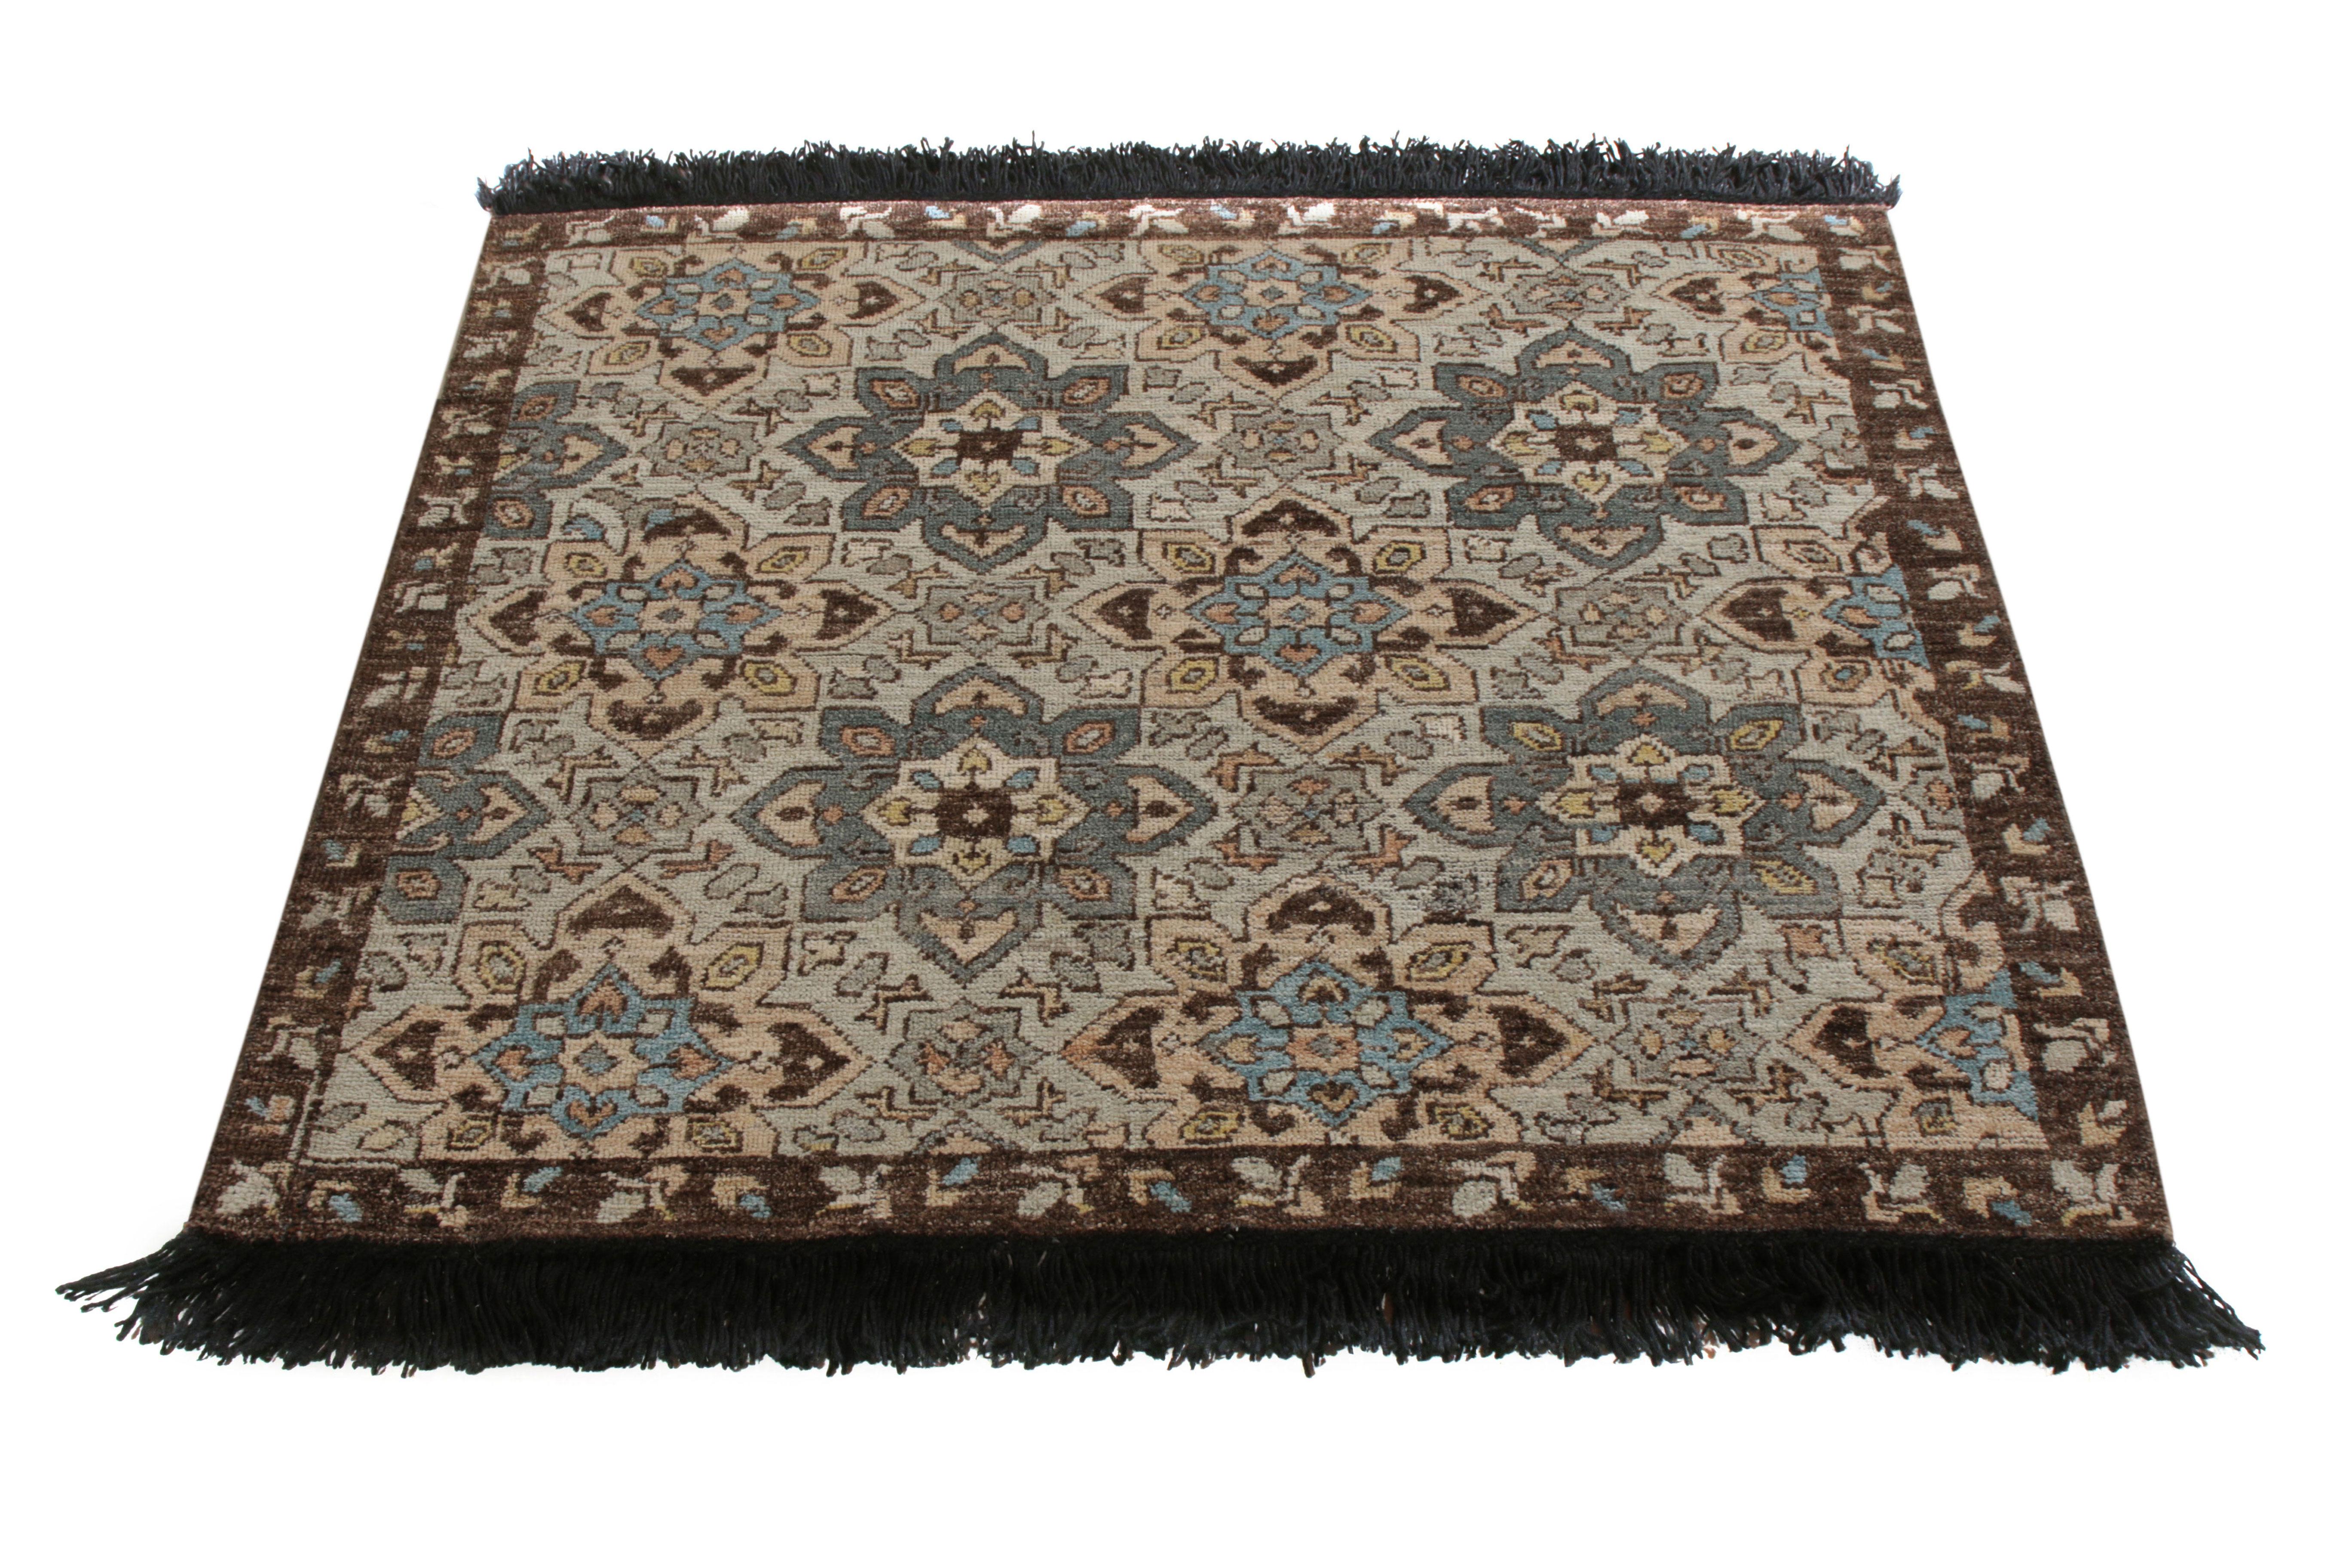 A 4 x 4 square rug inspired from celebrated transitional rug styles, from the Burano Collection by Rug & Kilim. Hand knotted in notably soft Ghazni wool, enjoying a warm-and-cool play of beige-brown and blue hues sitting peacefully underfoot.